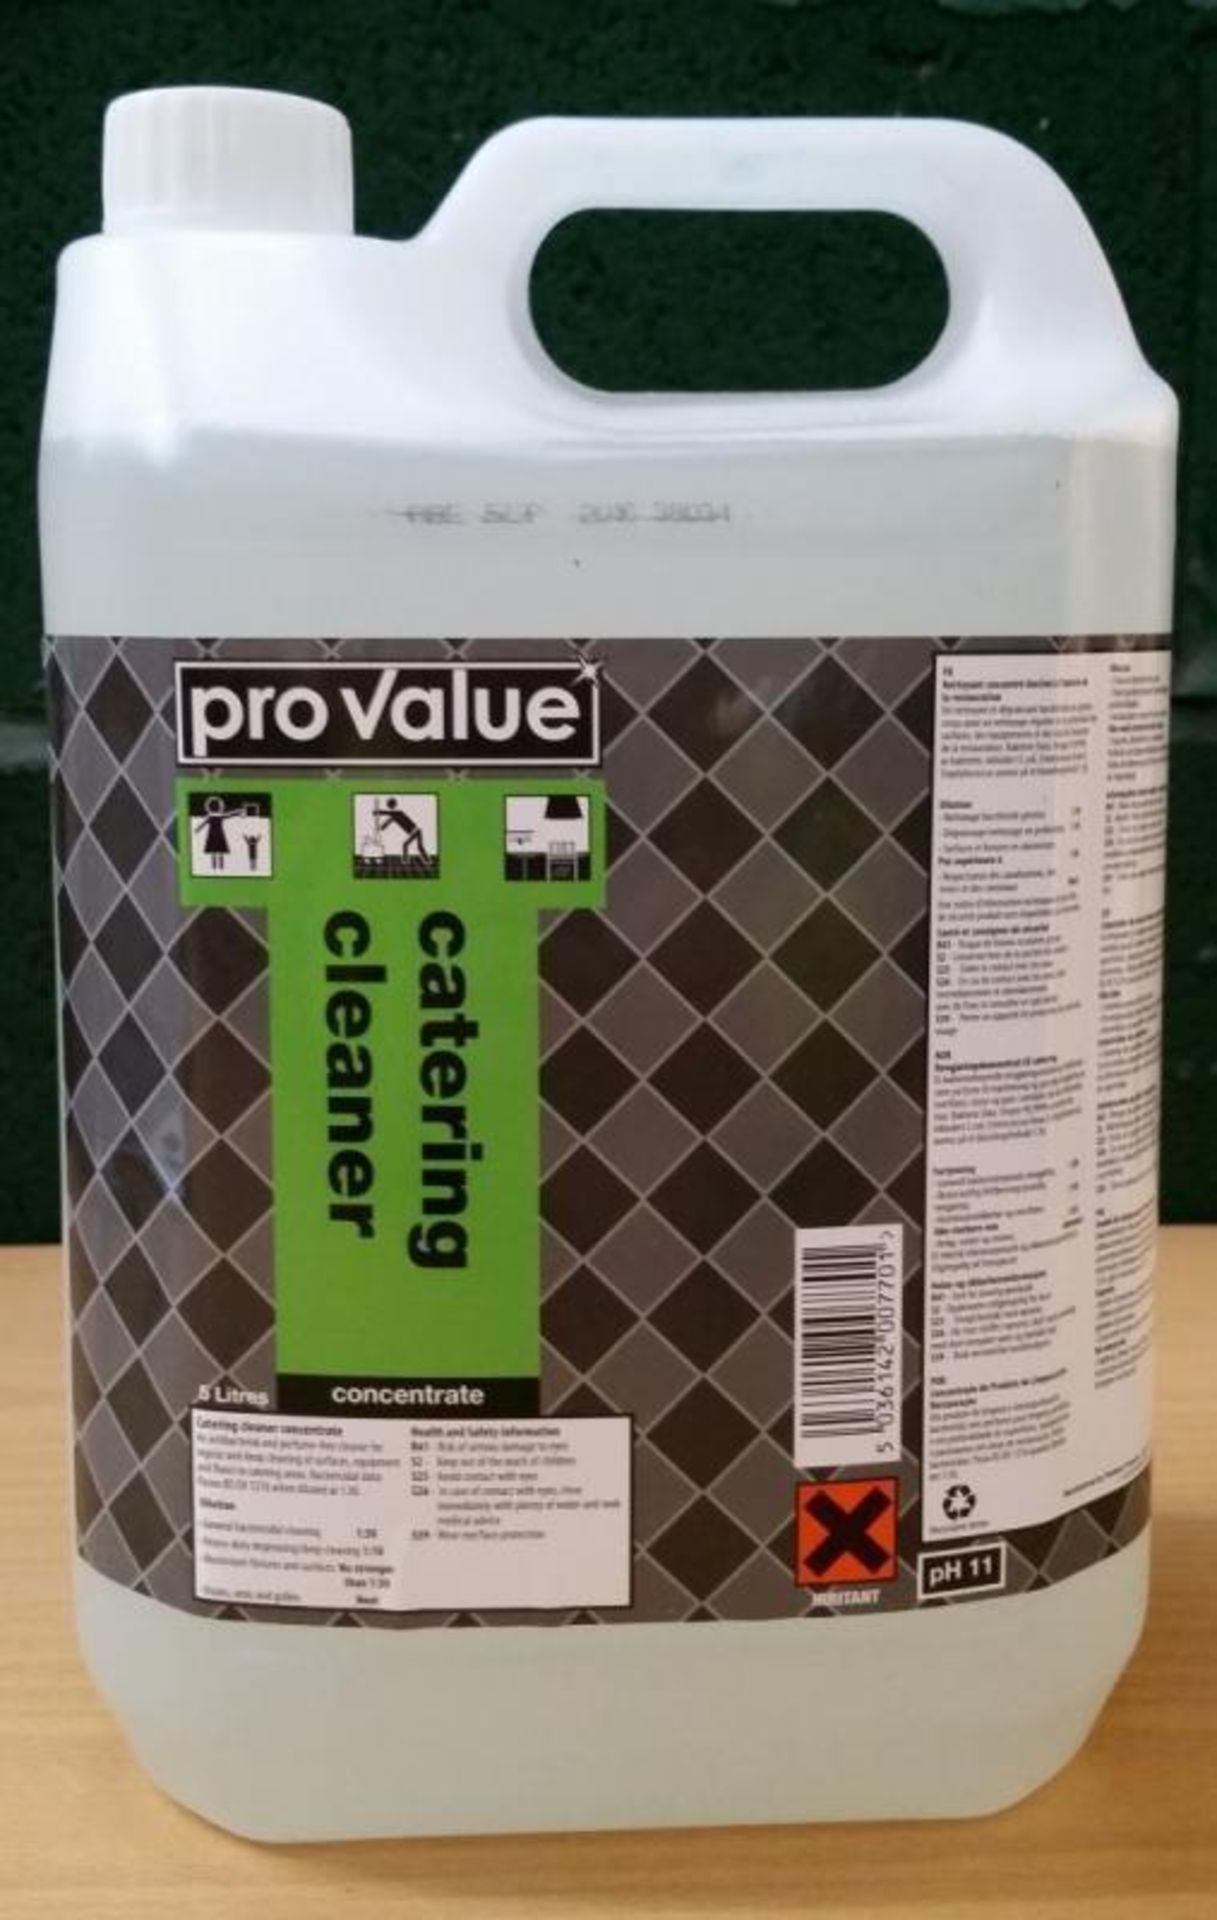 2 x Pro Value 5 Litre Catering Cleaner - Best Before September 2016 - New Boxed Stock - CL083 - Ref